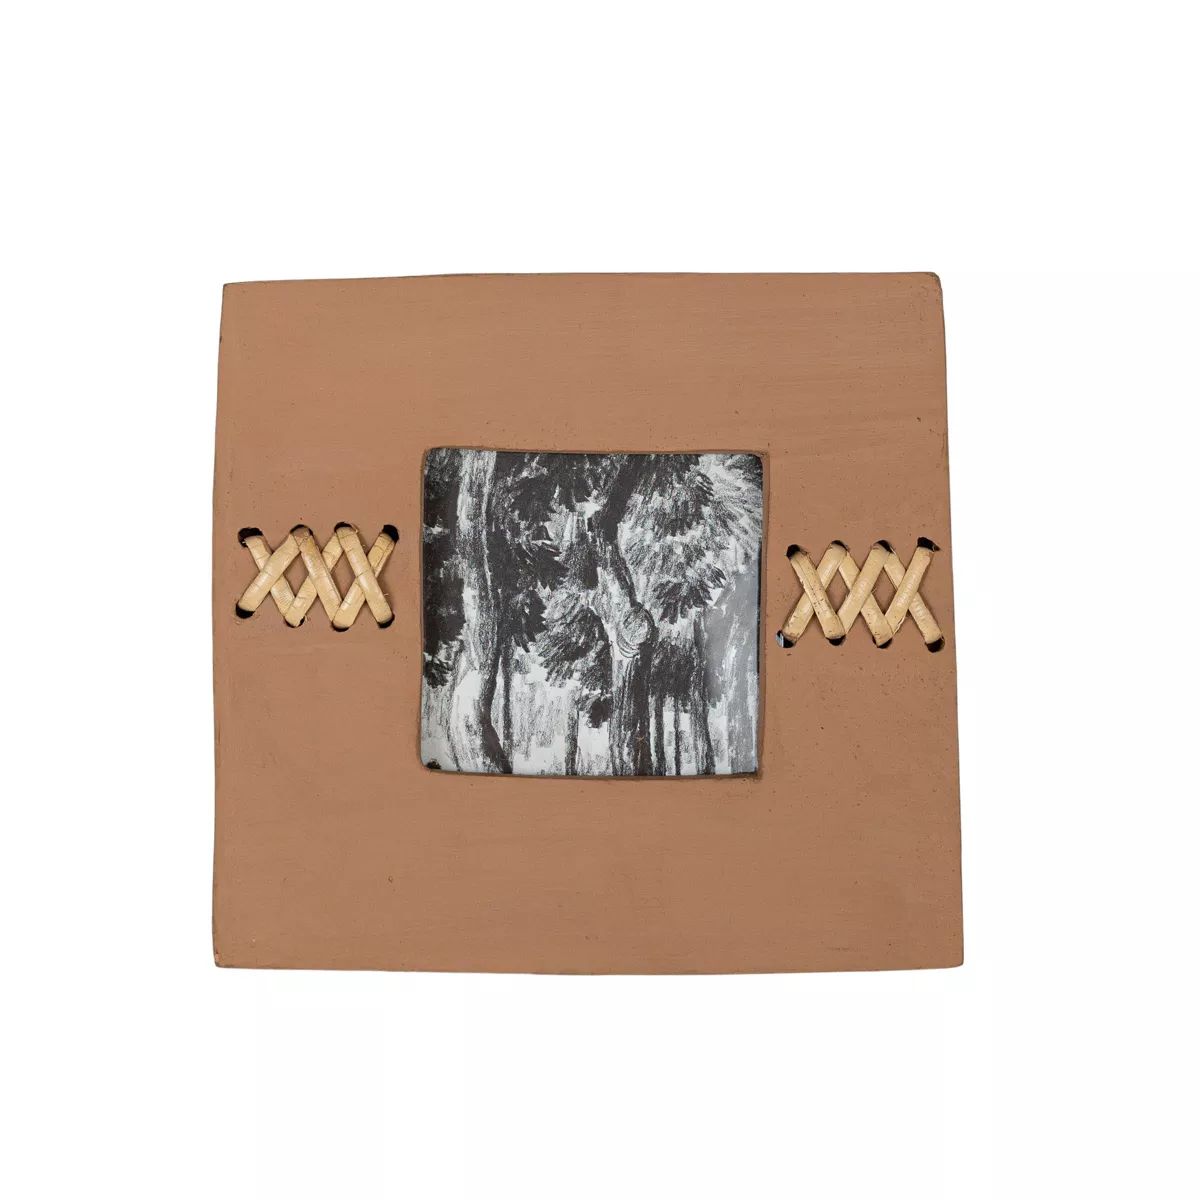 4X4 Inch Orange Terracotta Picture Frame with Cane & Glass by Foreside Home & Garden | Target